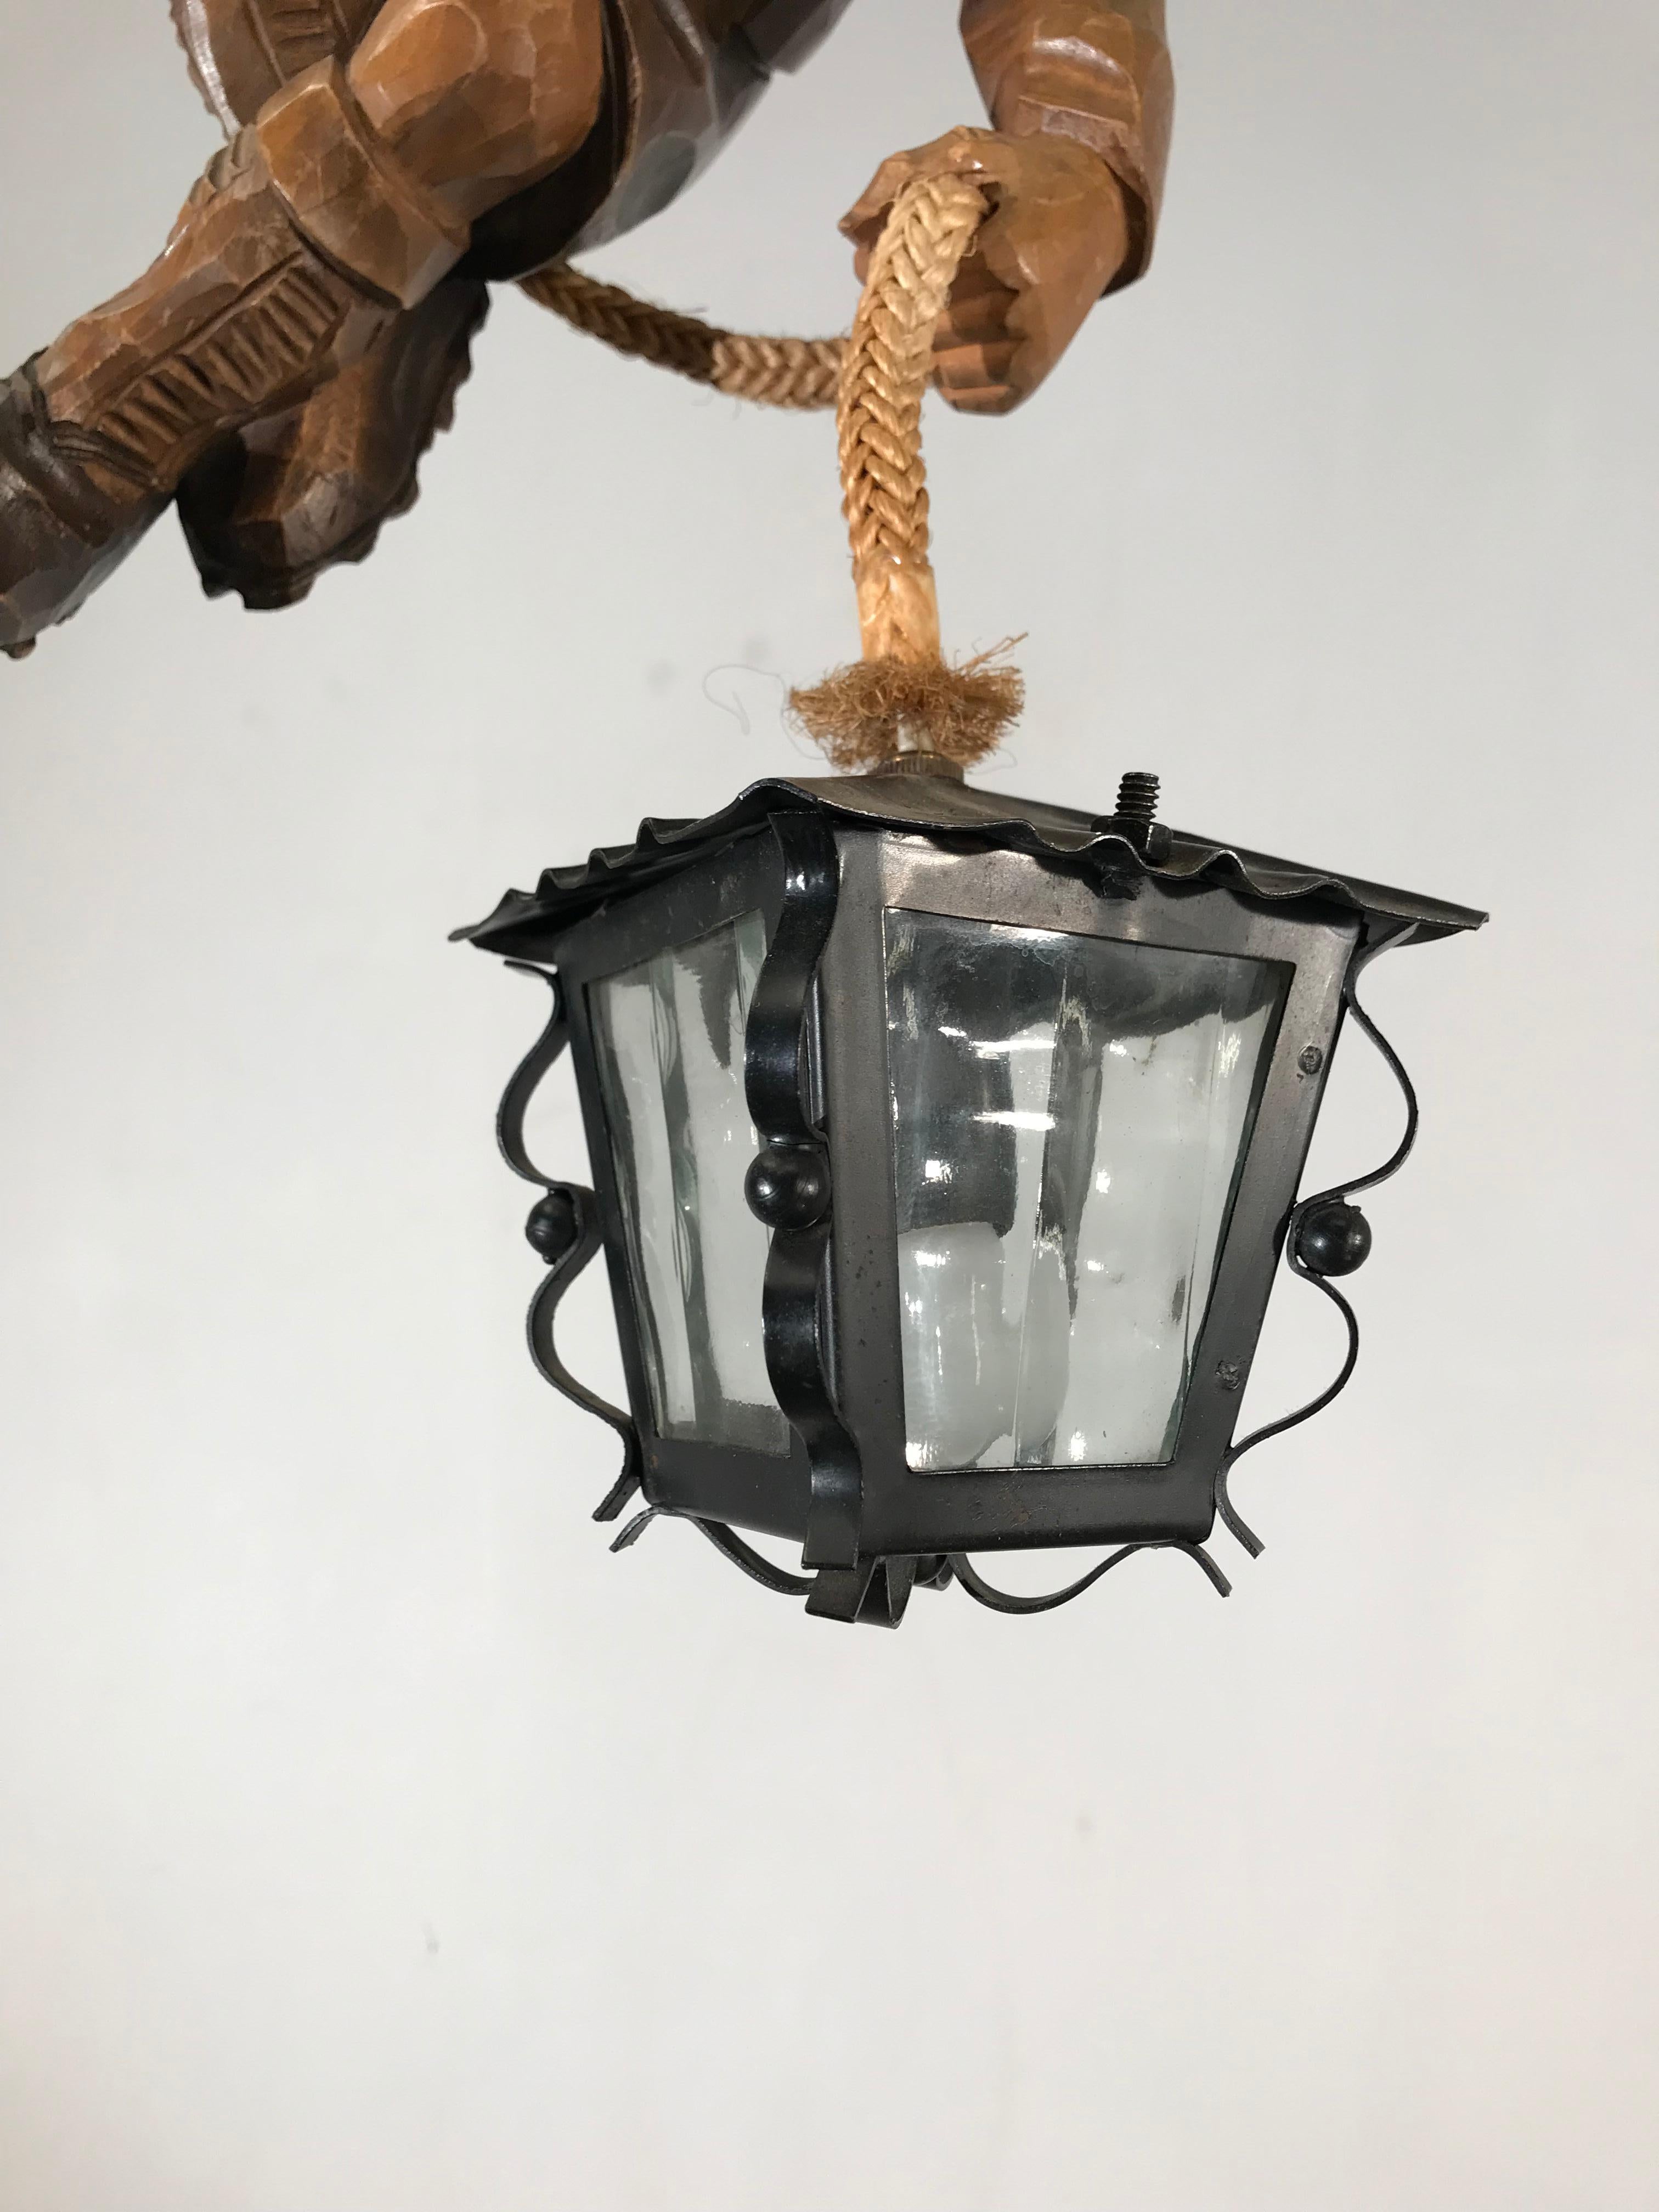 Black Forest Vintage Hand-Carved Wooden Mountaineer Sculpture Pendant Light with Lantern